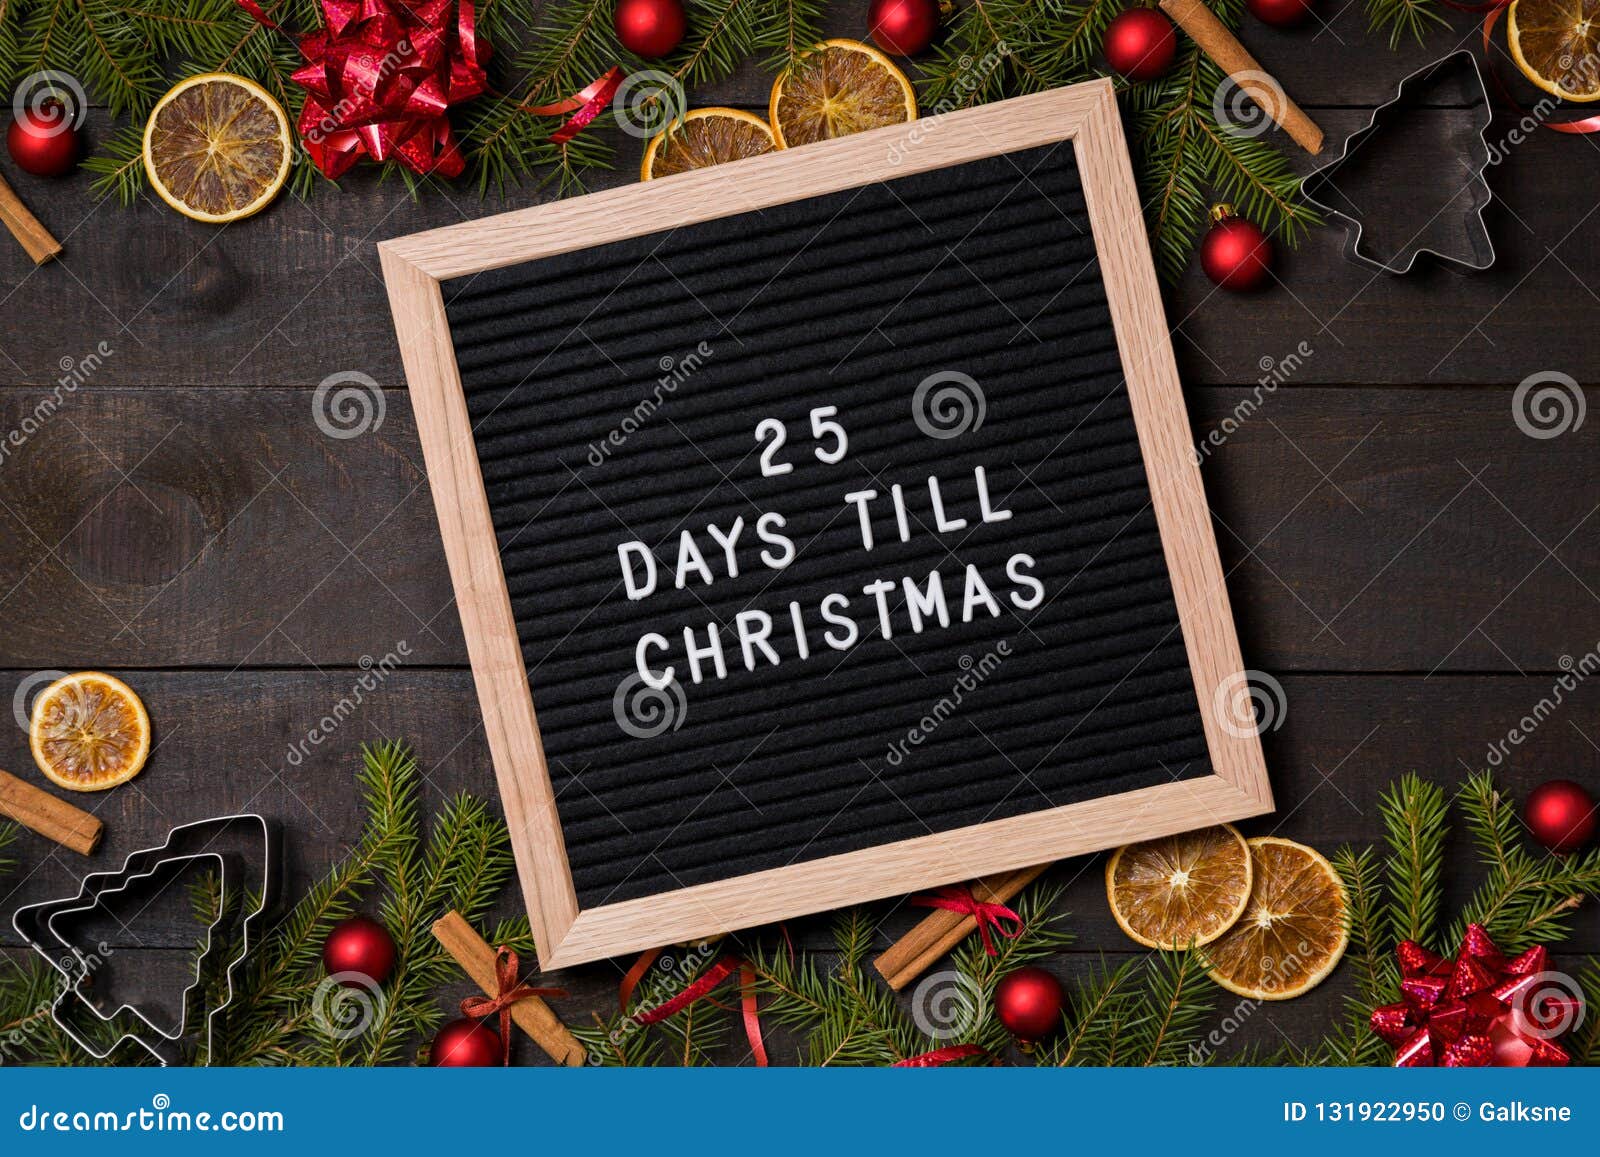 25 days till christmas countdown letter board on dark rustic wood